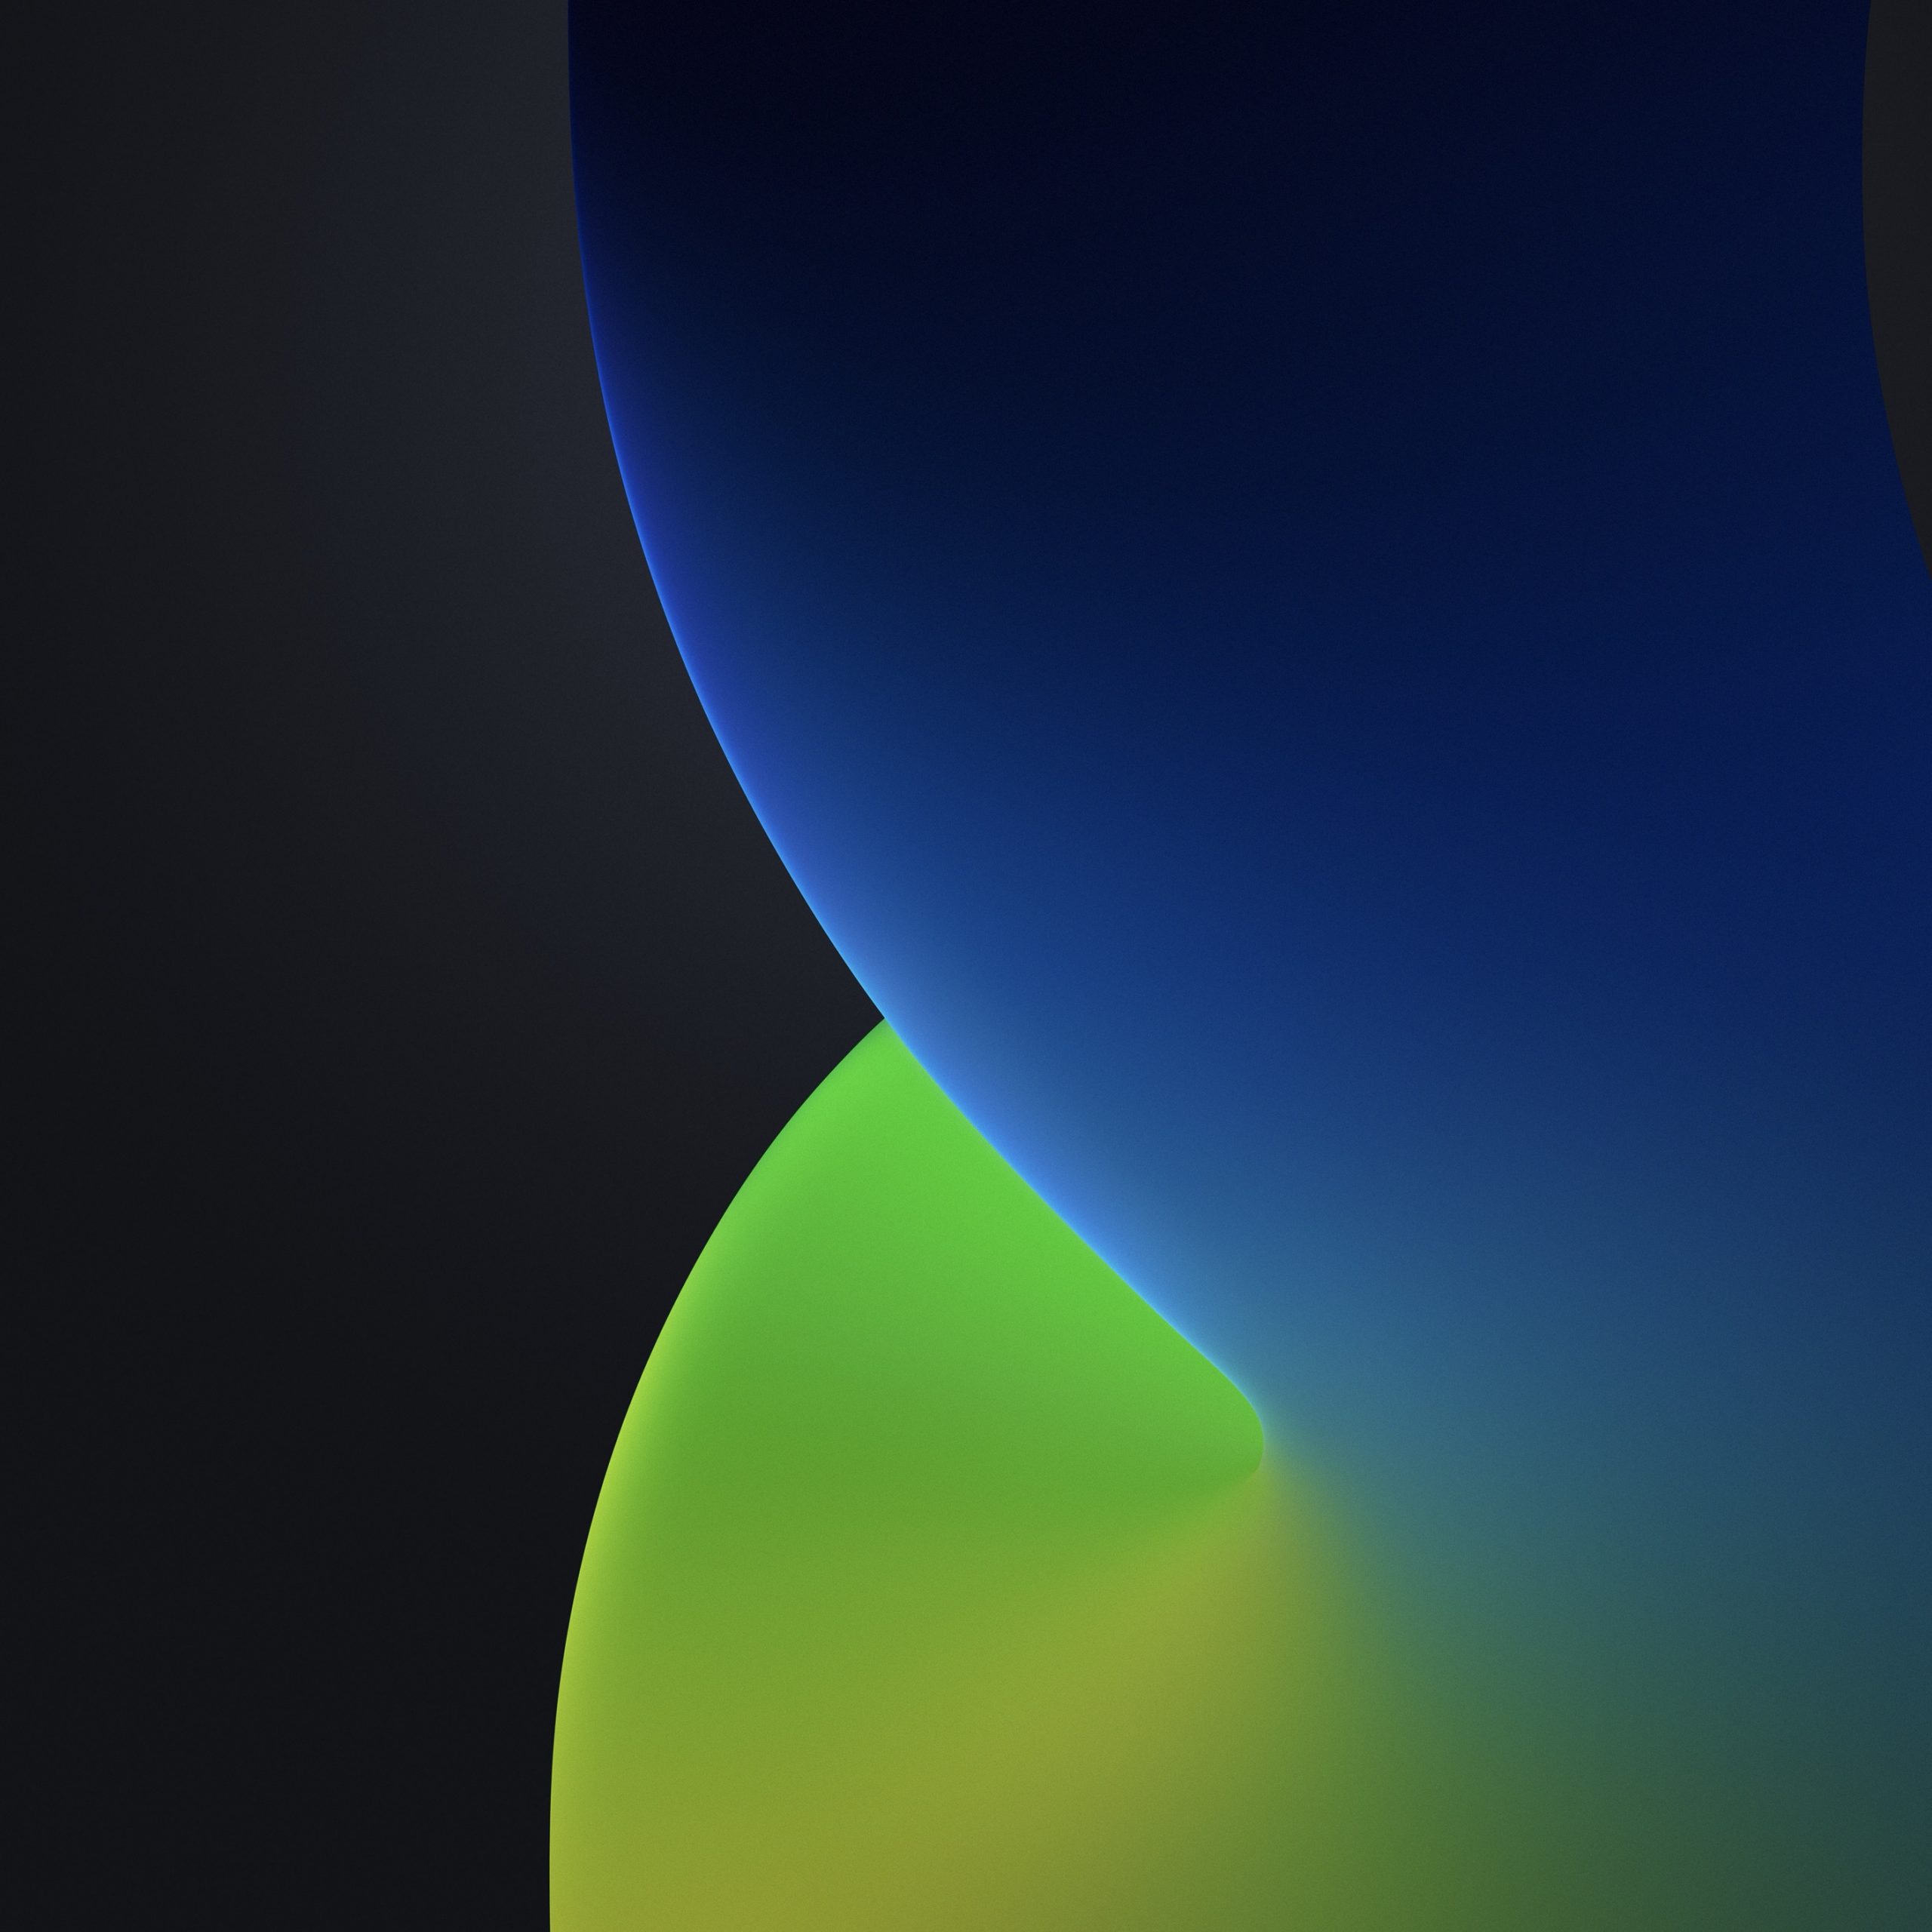 iOS 14 Wallpaper 4 scaled